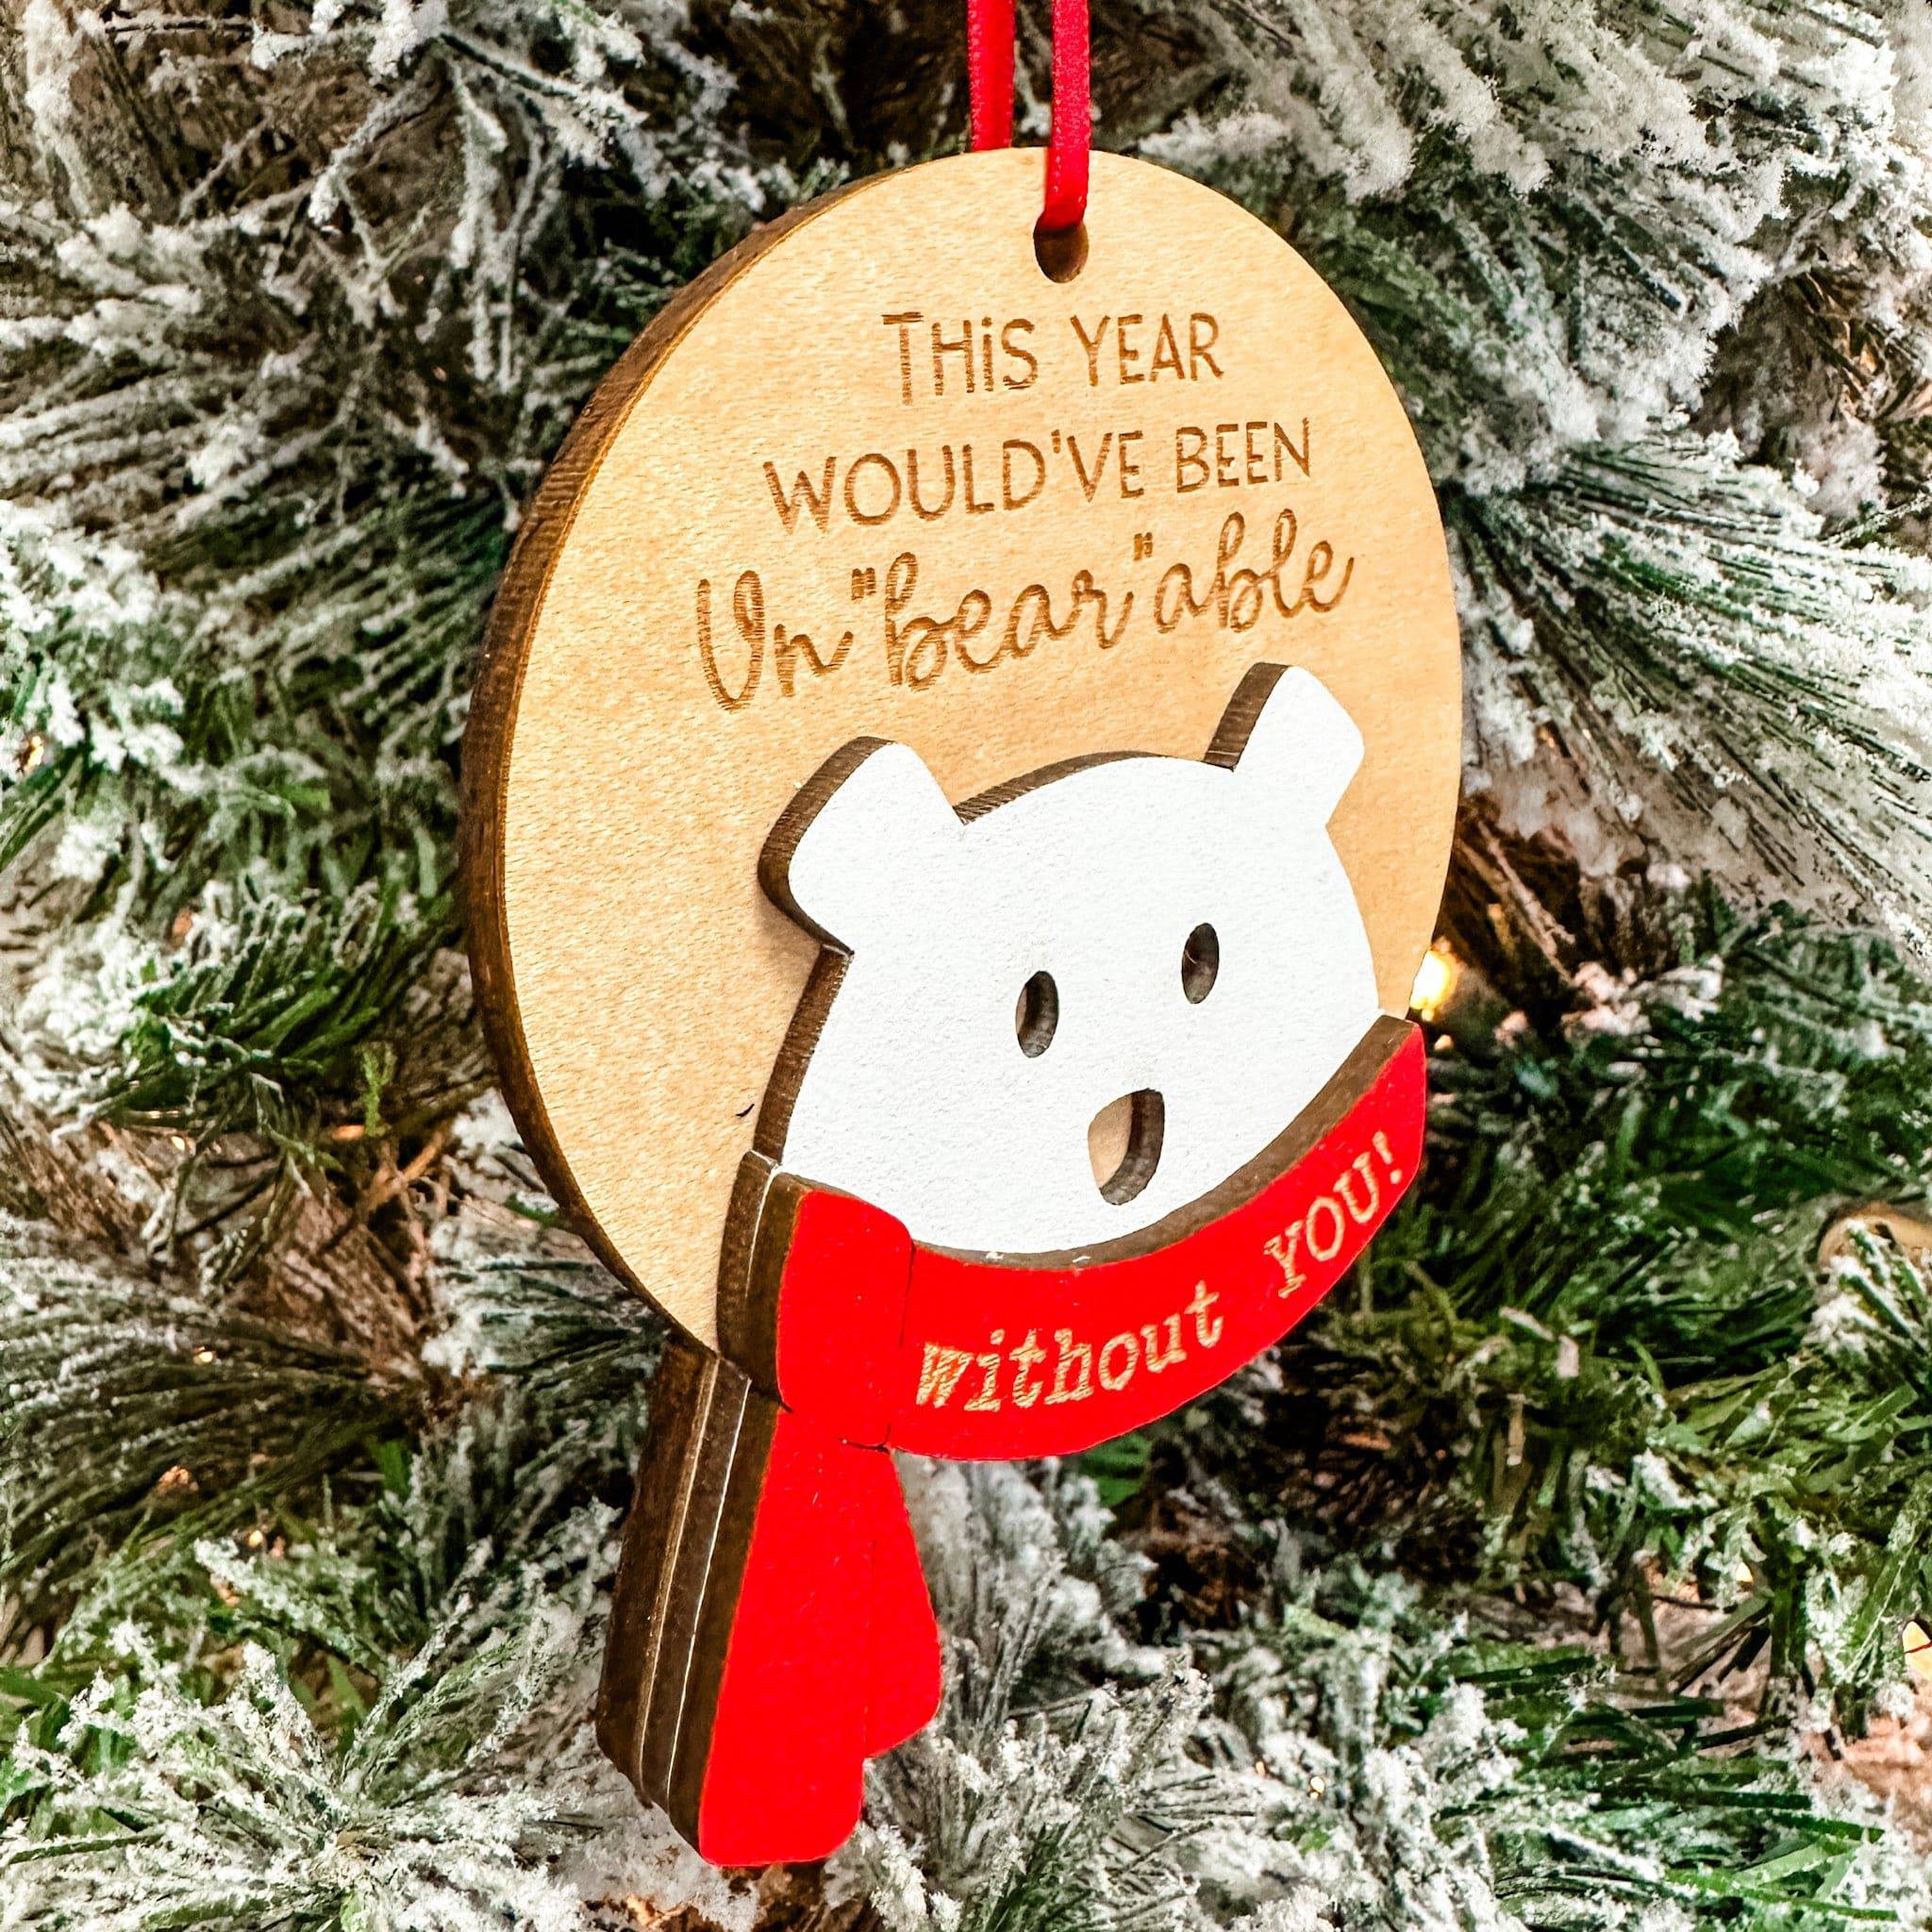 This Year Would've Been Un-Bear-able Without You 3D Wood Ornament - Sticks & Doodles